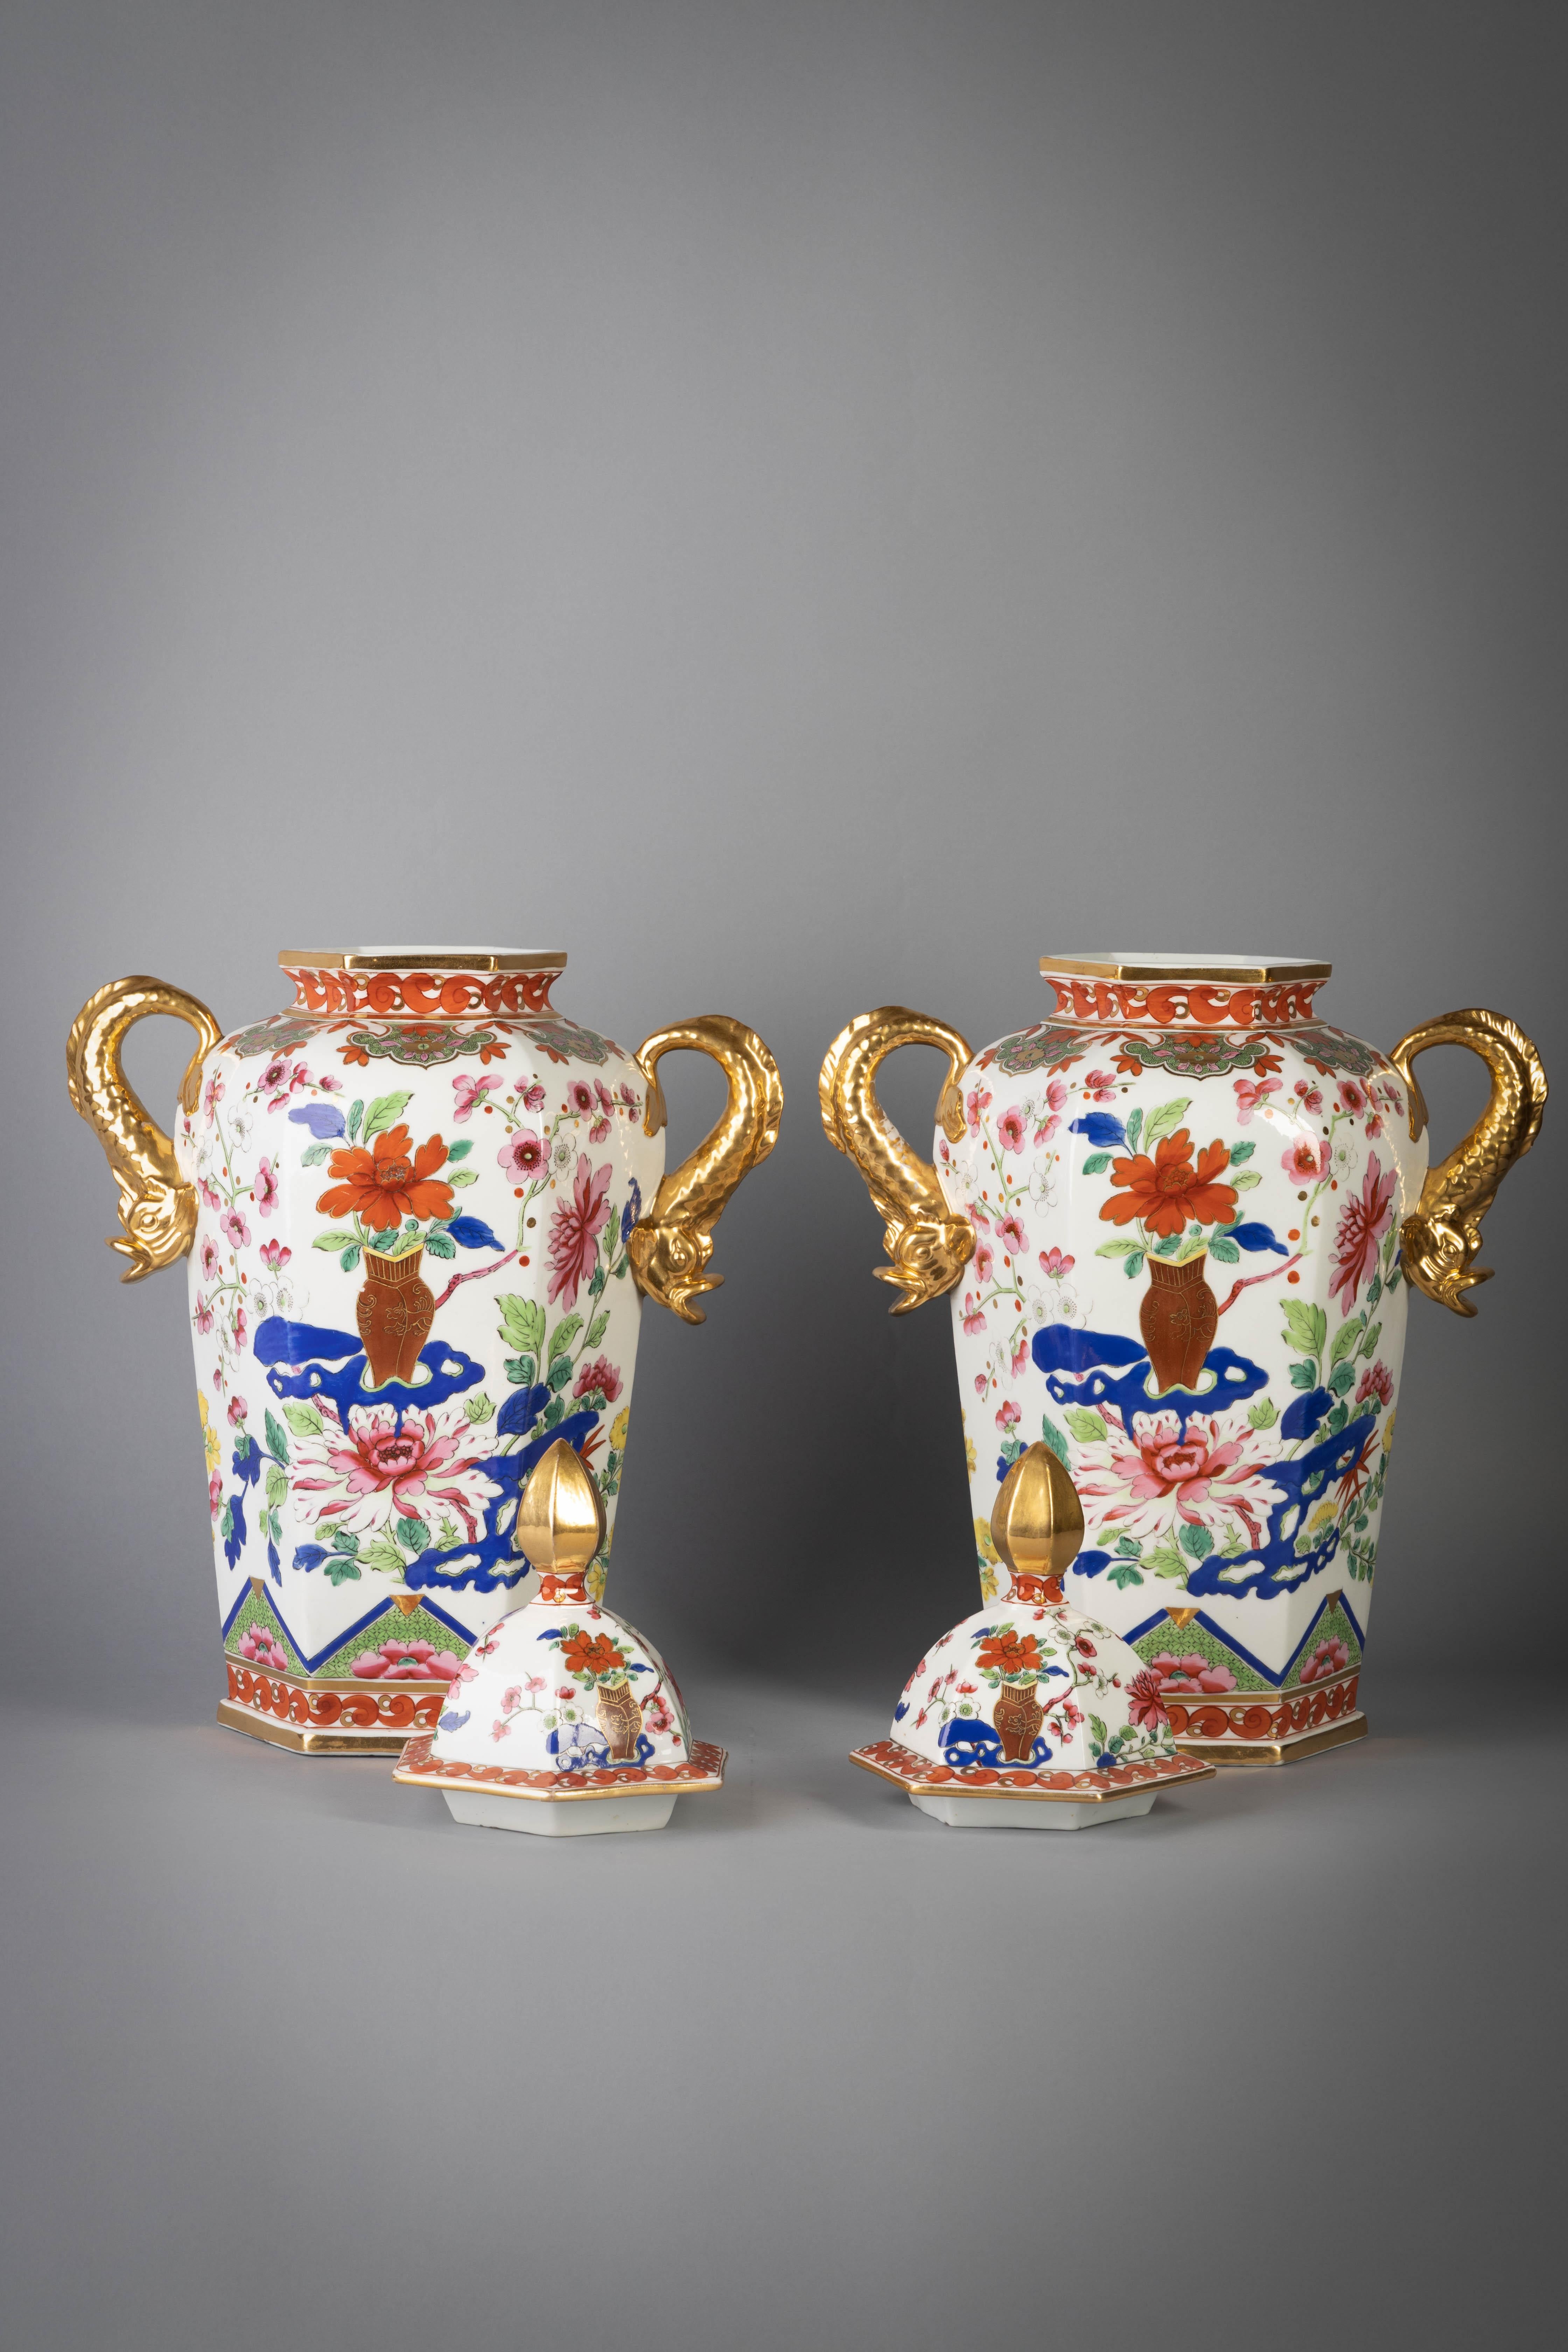 Each of hexagonal form with gilt dolphin handles, painted in the famille rose palette and enriched with blue, the front and back with chrysanthemum issuing from a brown vase and flowering peony and flowering branches, the covers similar decorated